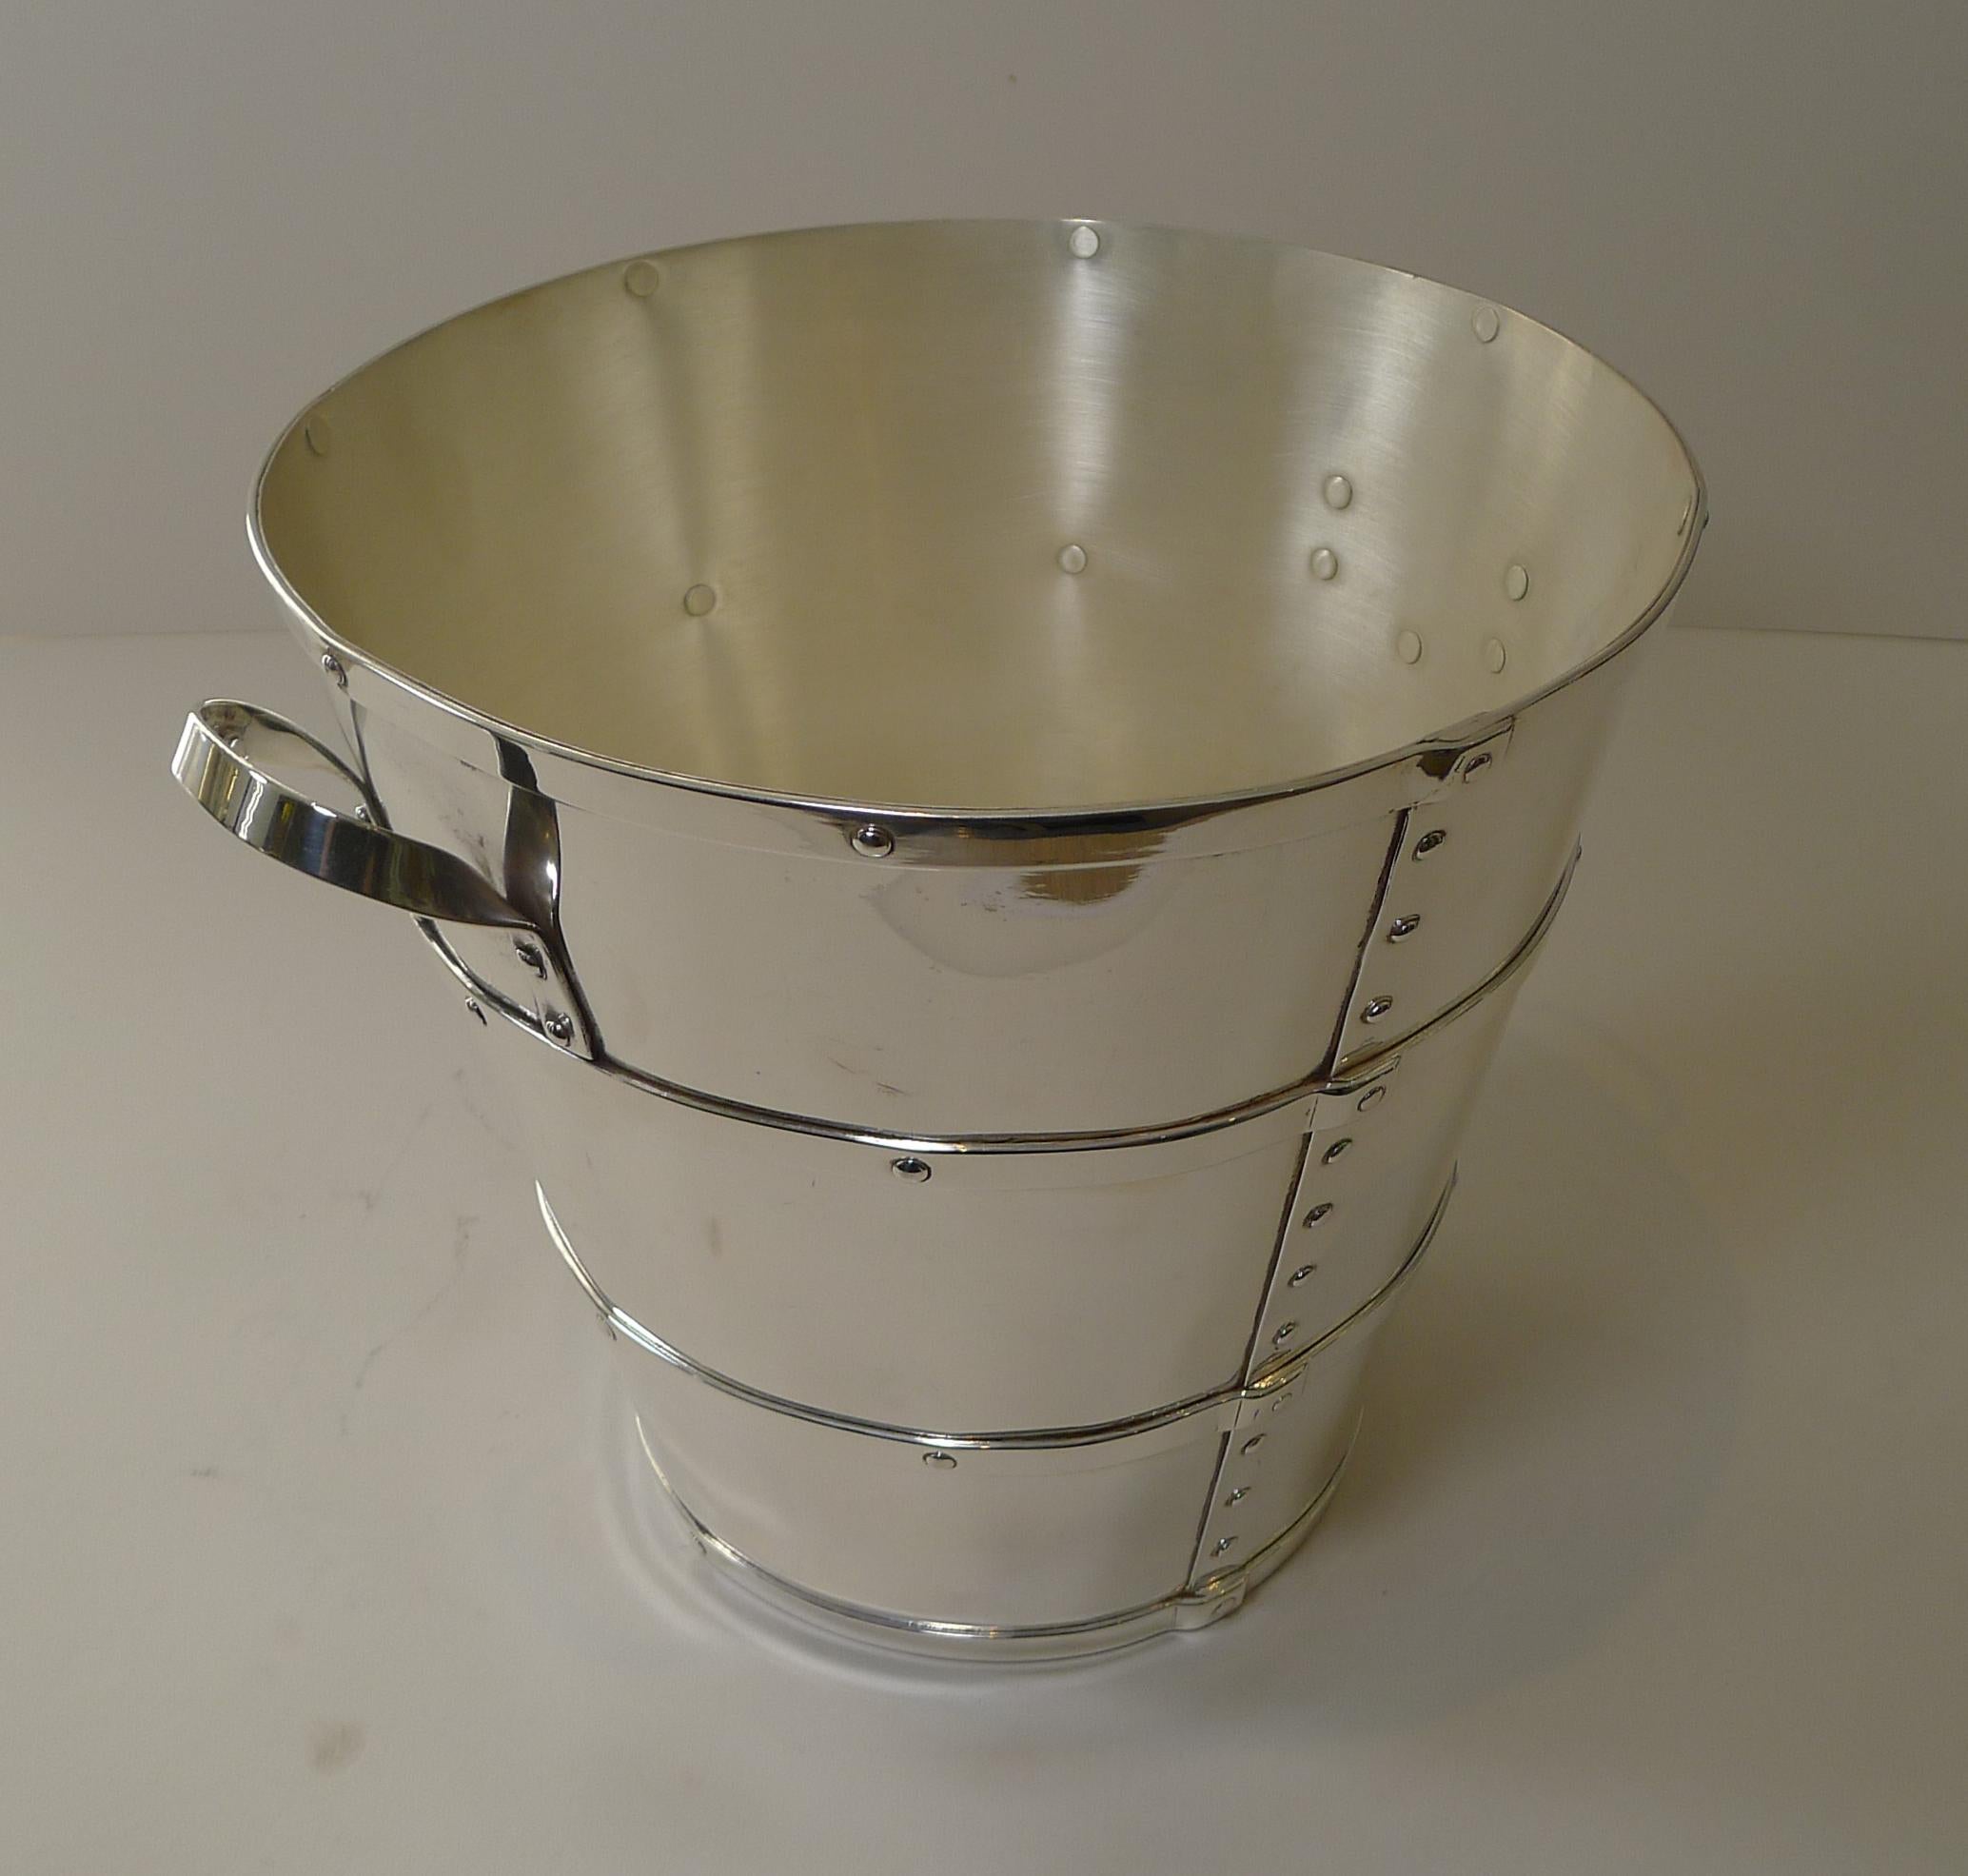 A magnificent and most unusual wine cooler or Champagne bucket made from silver plate and beautifully crated in the form of riveted leather bucket with handles, a great look, almost industrial in style.

The underside is fully marked for the